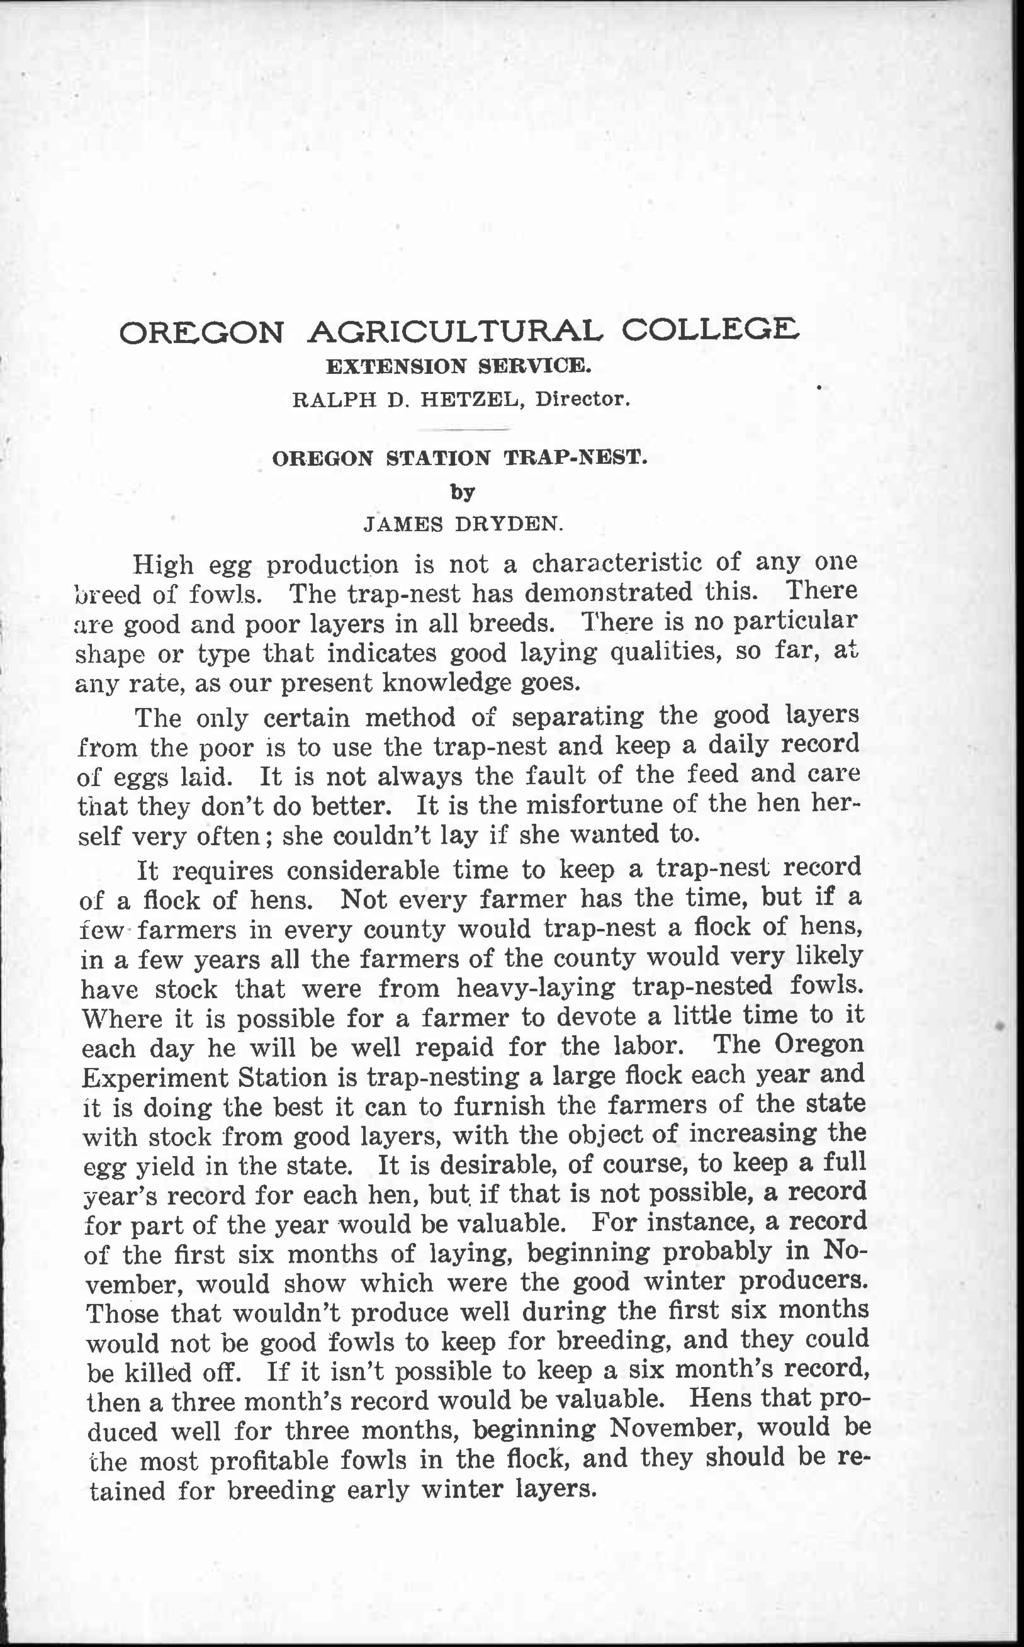 OREGON AGRICULTURAL COLLEGE EXTENSION SERVICE. RALPH D. HETZEL, Director. OREGON STATION TRAP-NEST. by JAMES DRYDEN. High egg production is not a characteristic of any one breed of fowls.